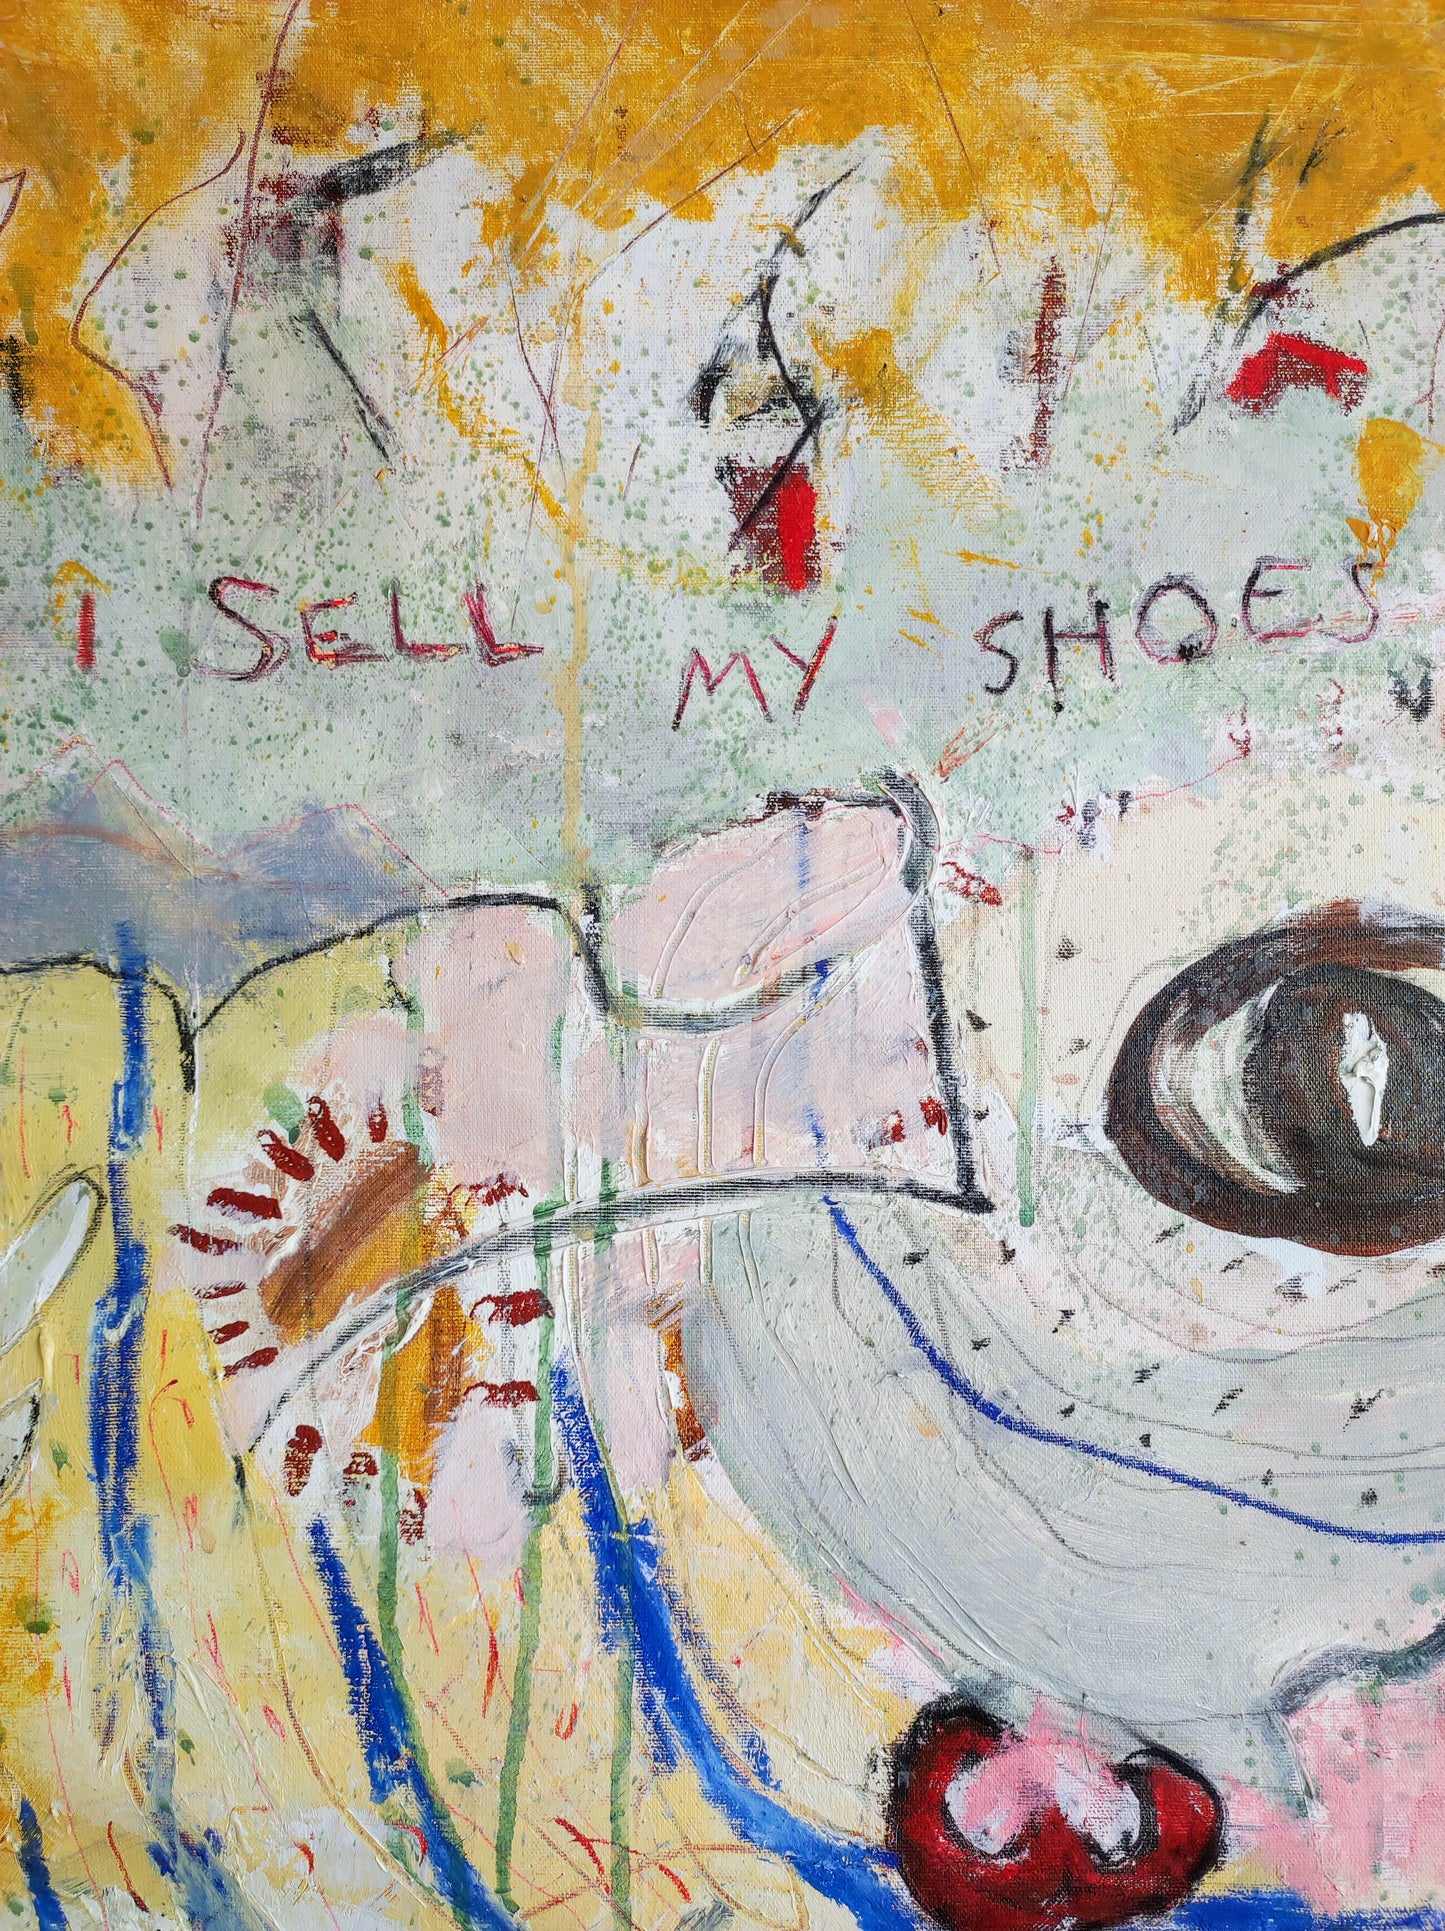 I sell my shoes